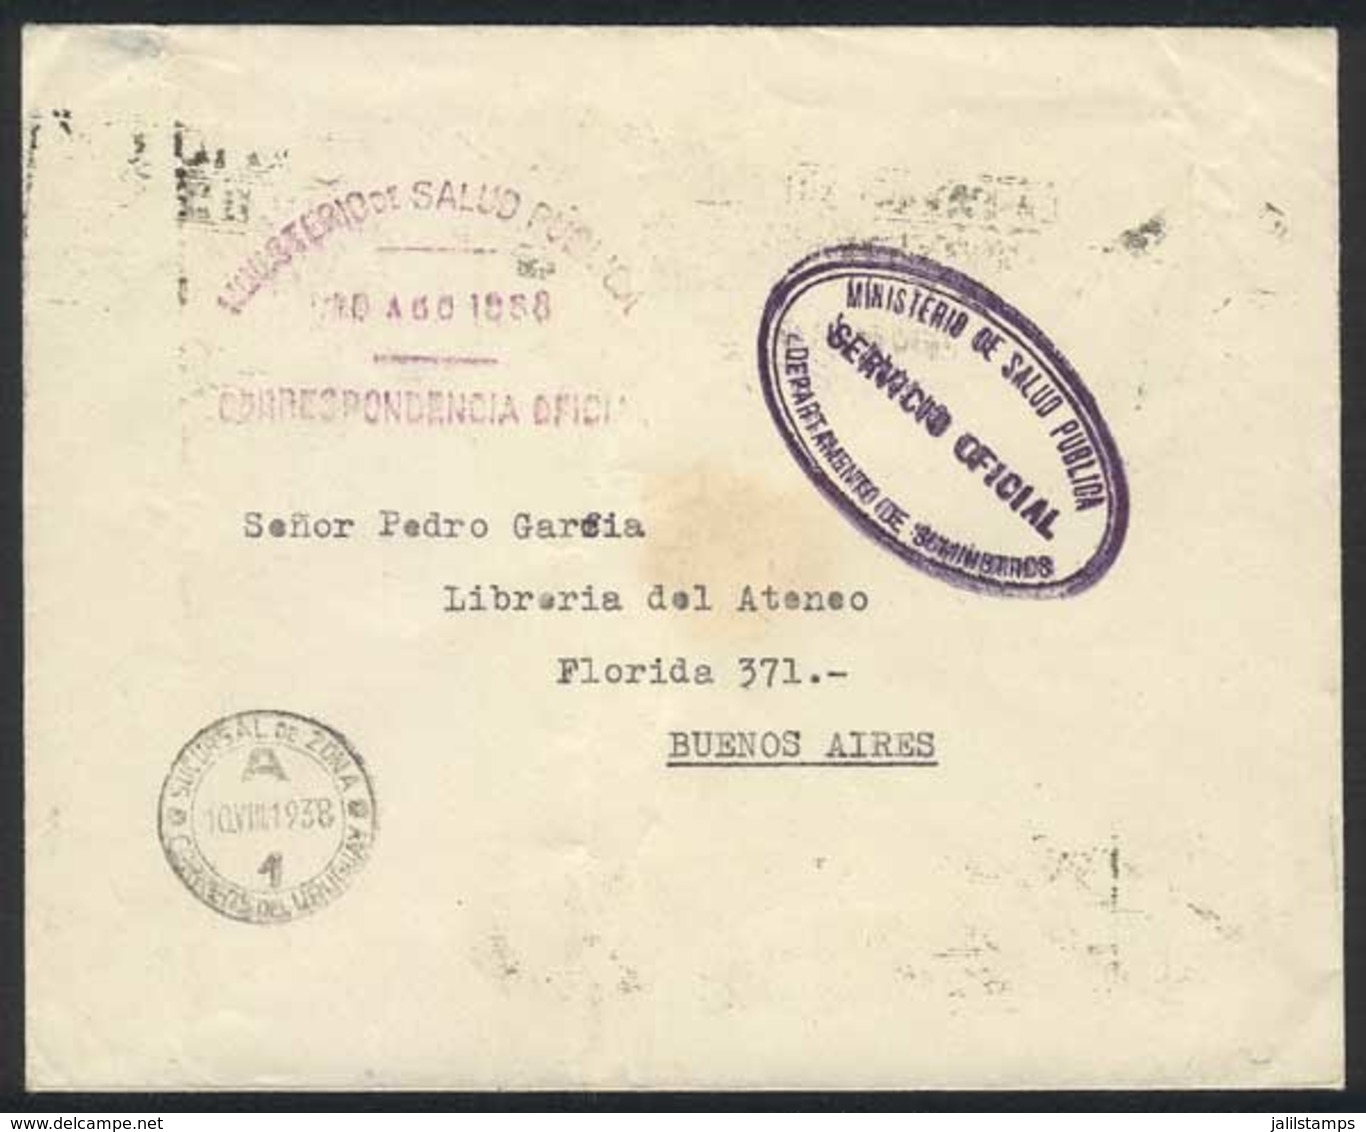 URUGUAY: Cover Of The Ministry Of Public Health Sent Stampless To Argentina On 10/AU/1938, Datestamped "SUCURSAL DE ZONA - Uruguay